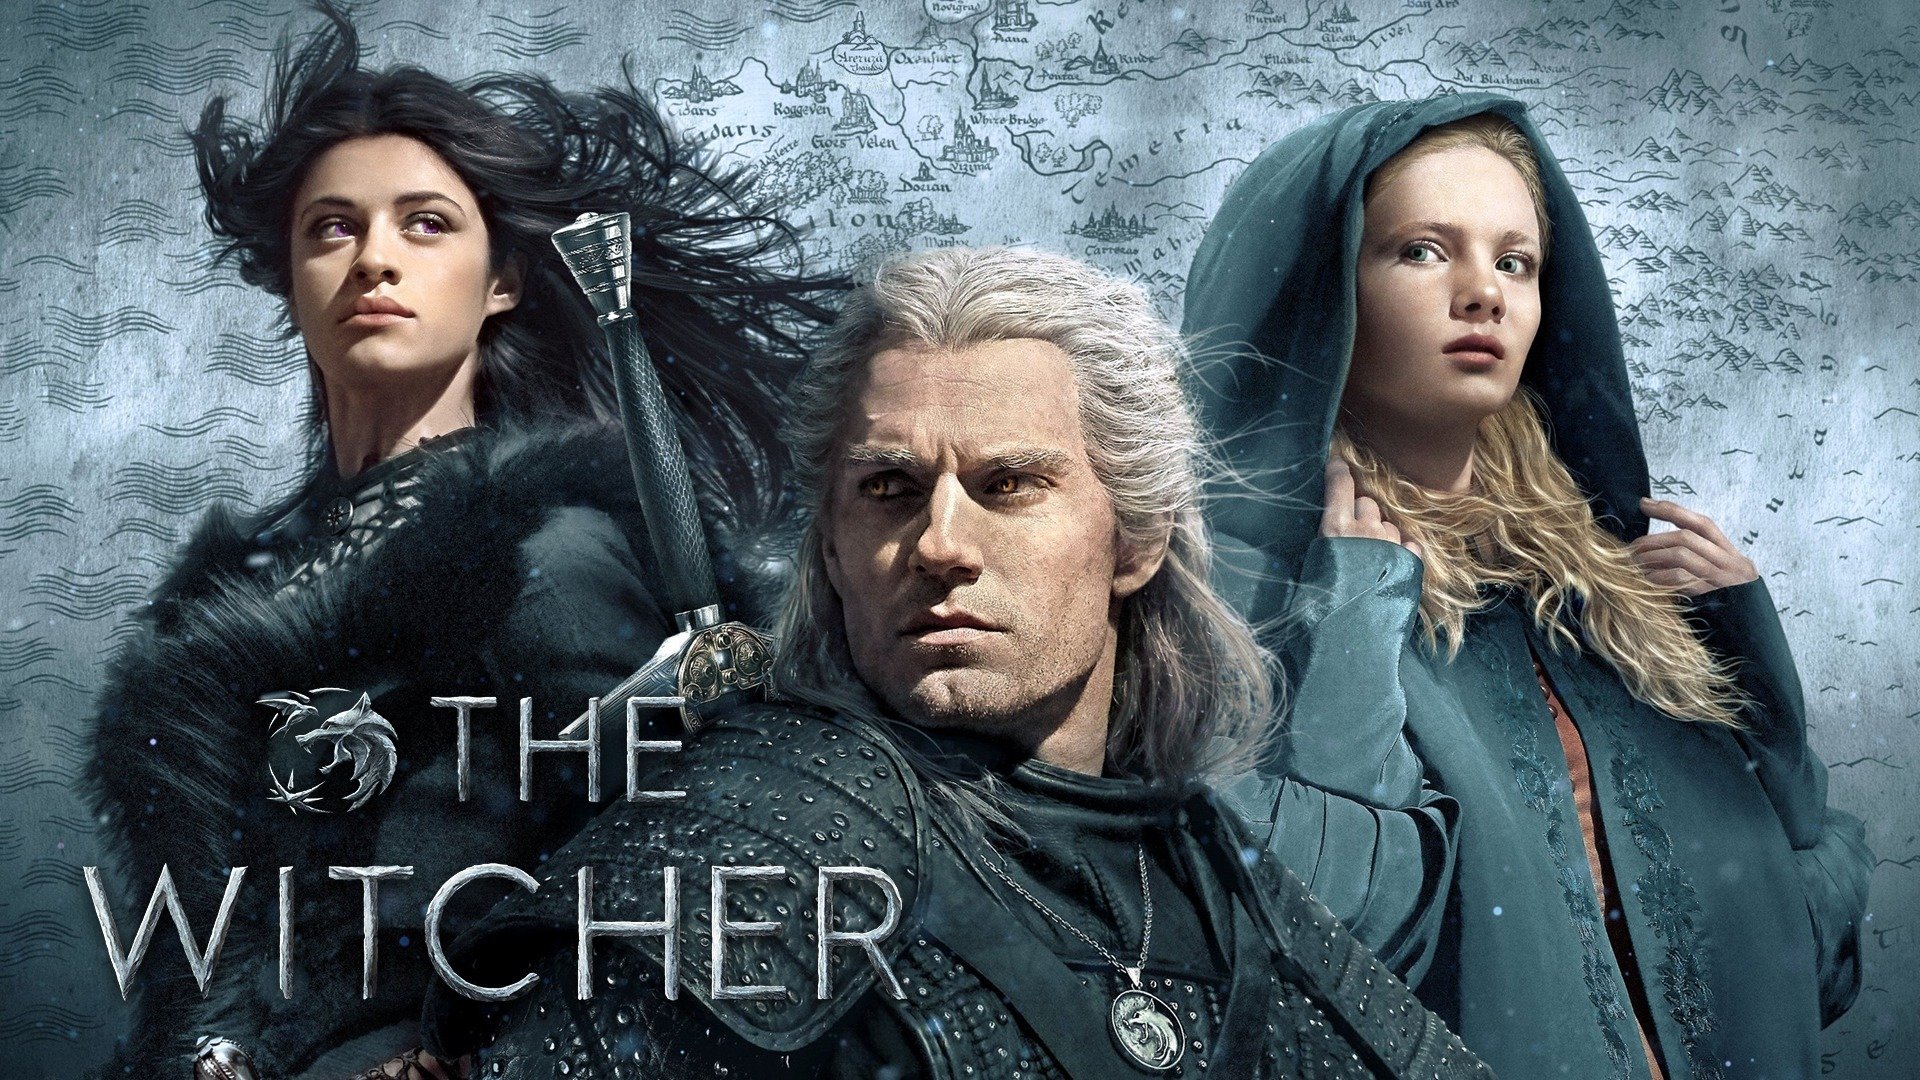 The Witcher Season 2 2022 Movie Mp4 Download (Latest English Movie)